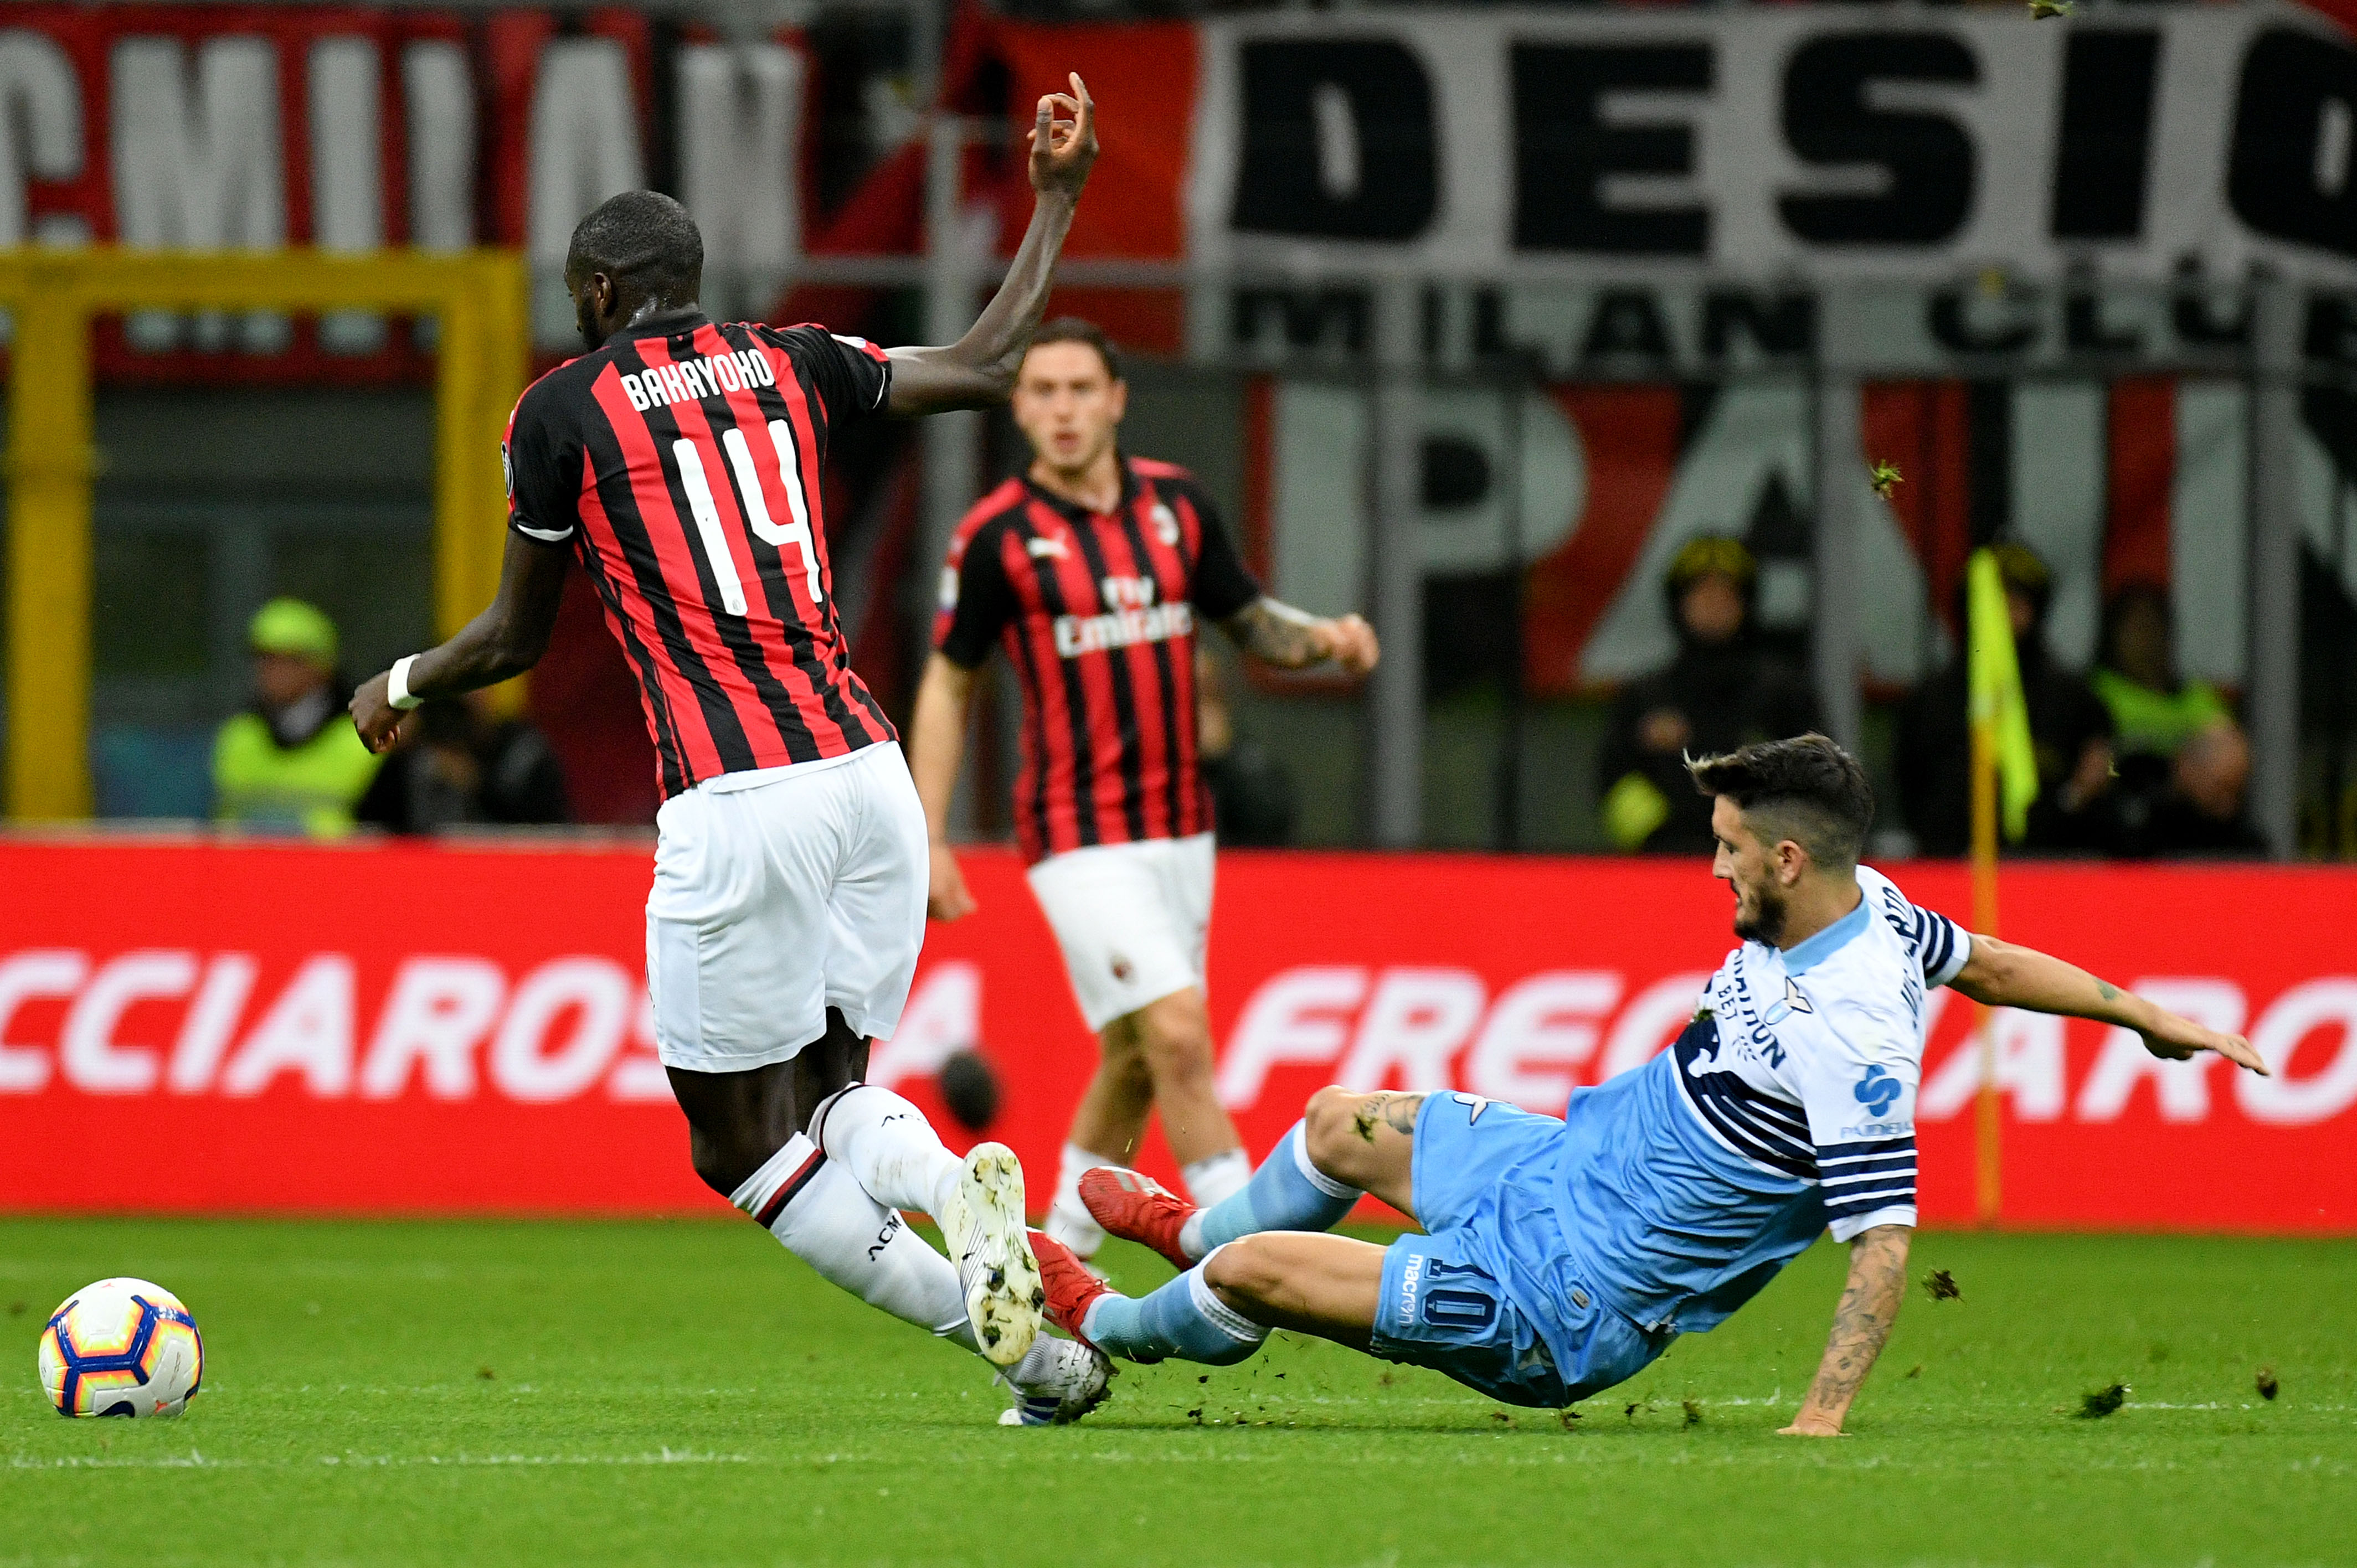 MILAN, ITALY - APRIL 24:  Ti?mou? Bakayoko of AC Milan compete for the ball with Luis Alberto of SS Lazio during the TIM Cup match between AC Milan and SS Lazio at Stadio Giuseppe Meazza on April 24, 2019 in Milan, Italy.  (Photo by Marco Rosi/Getty Images)